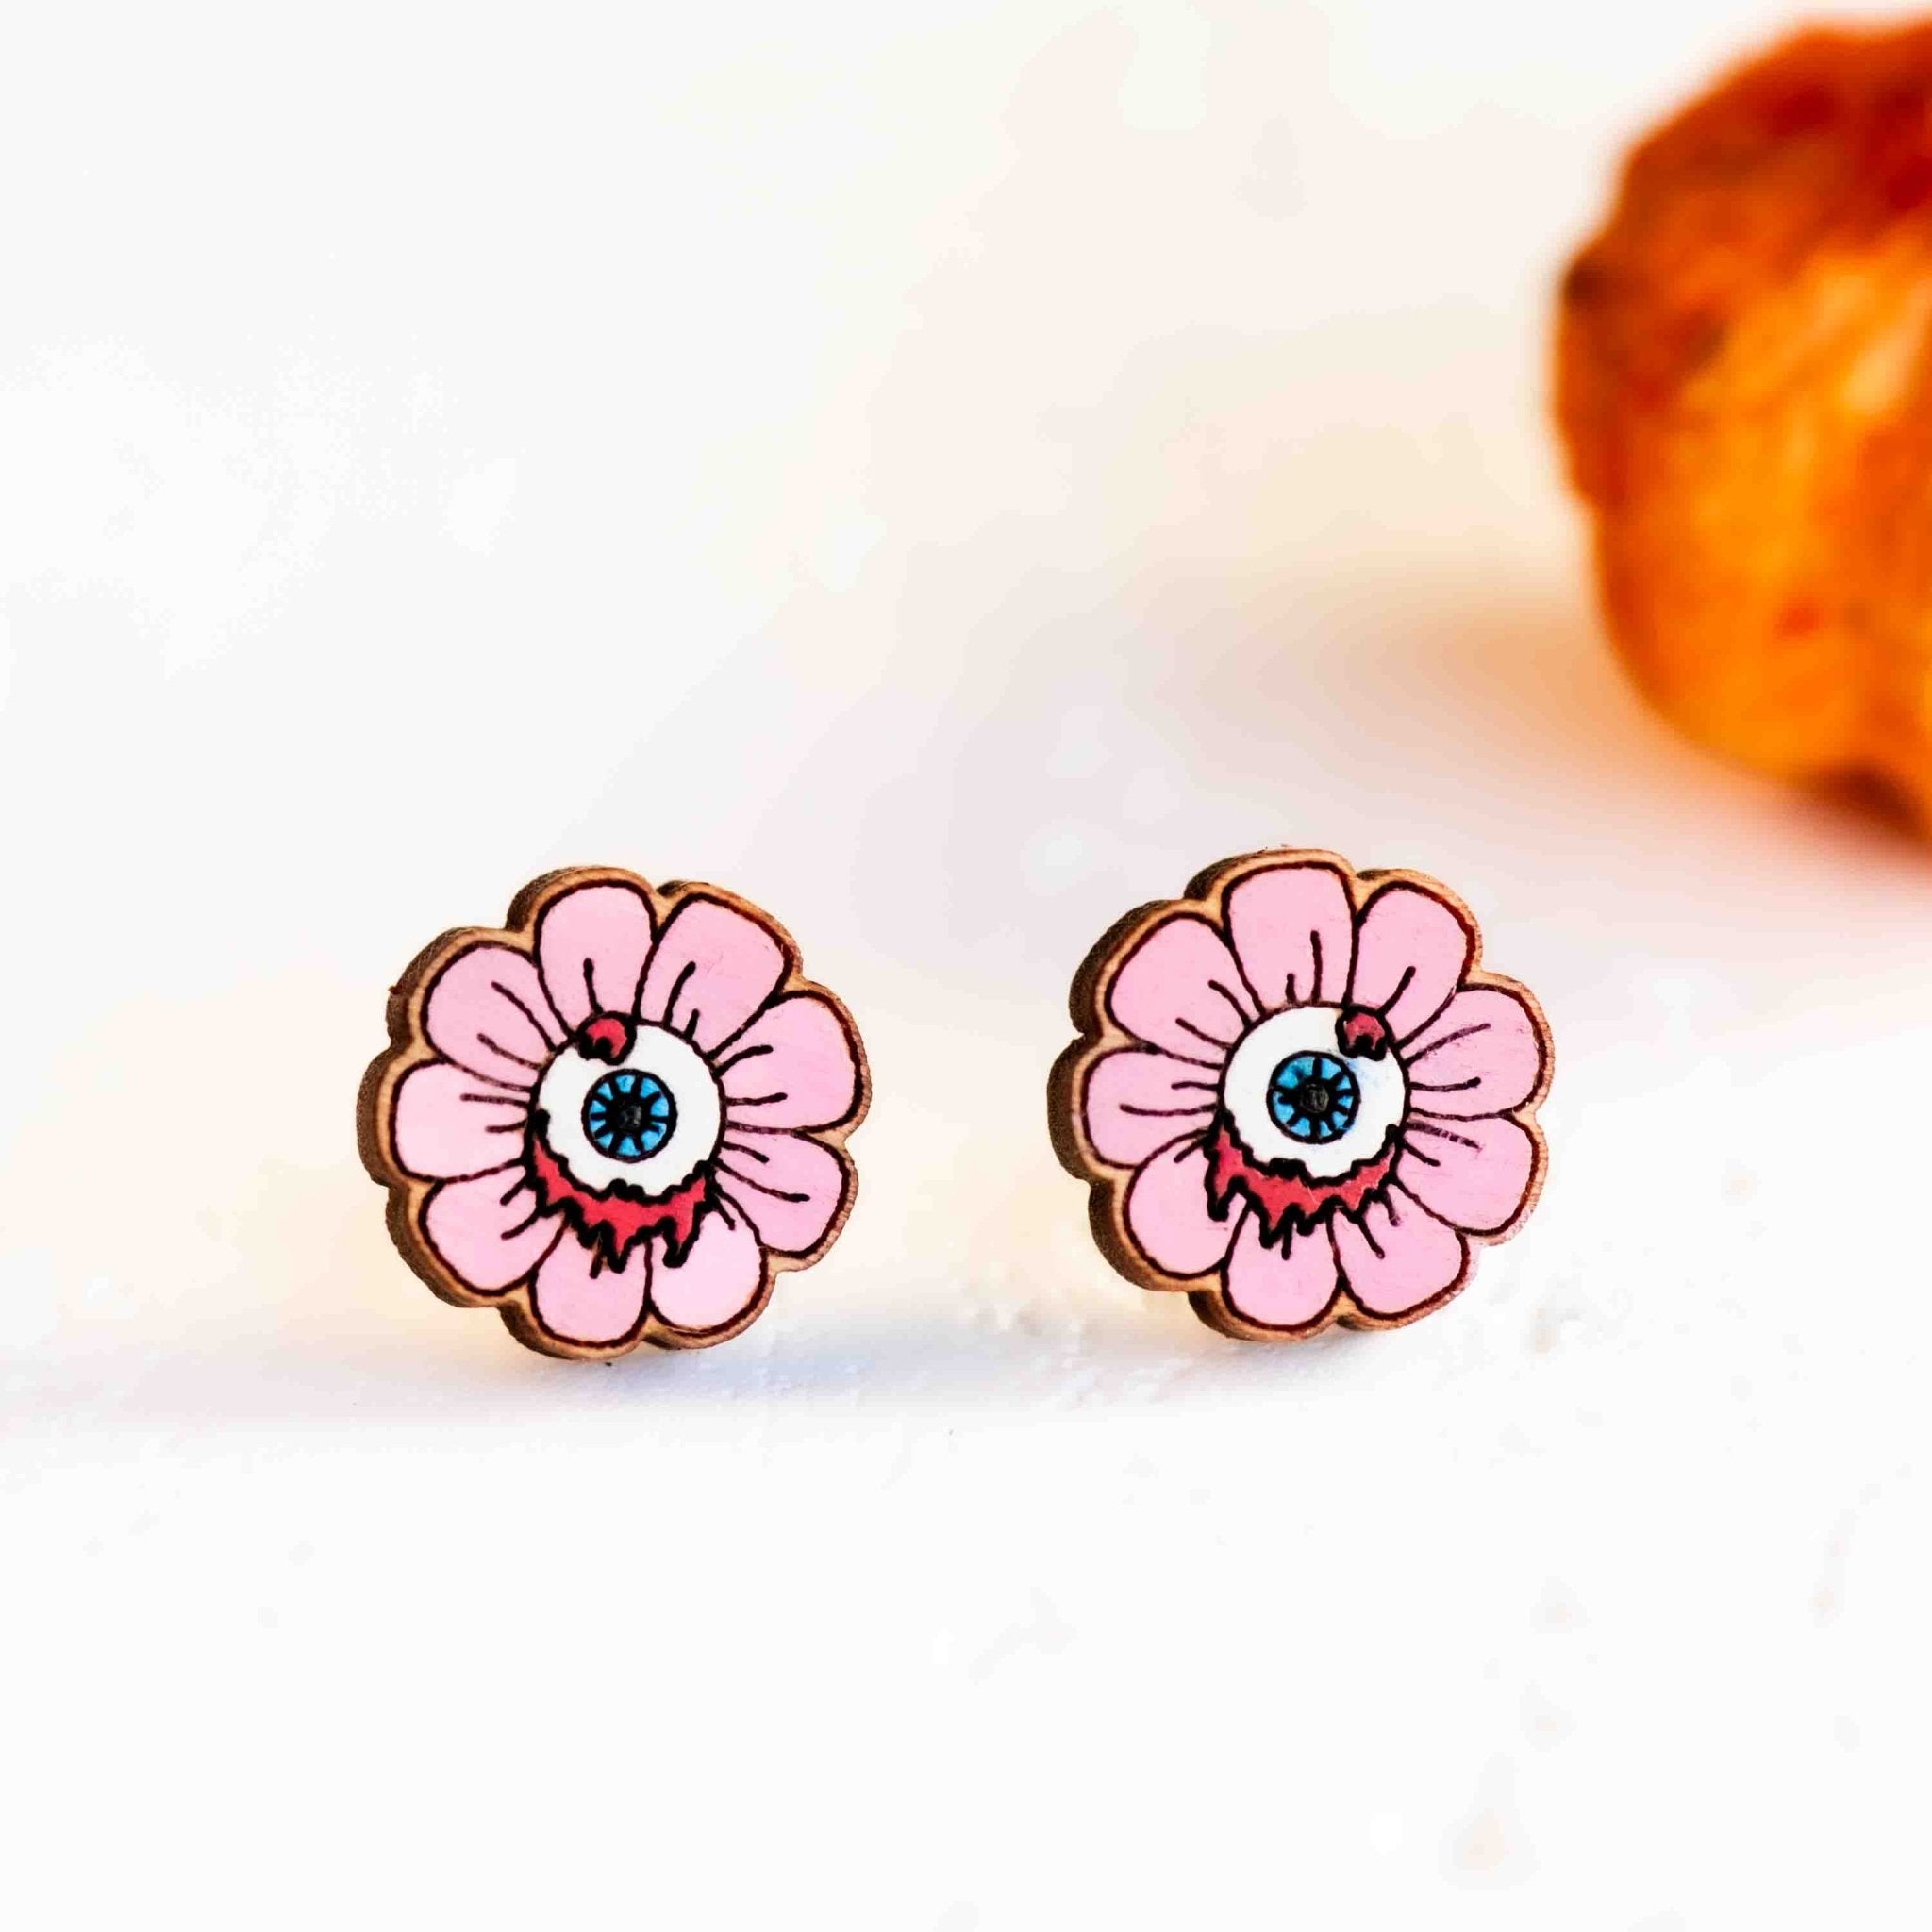 Hand-painted Eyeball Flower Stud Earrings Halloween Collection - PET15181 - Robin Valley Official Store